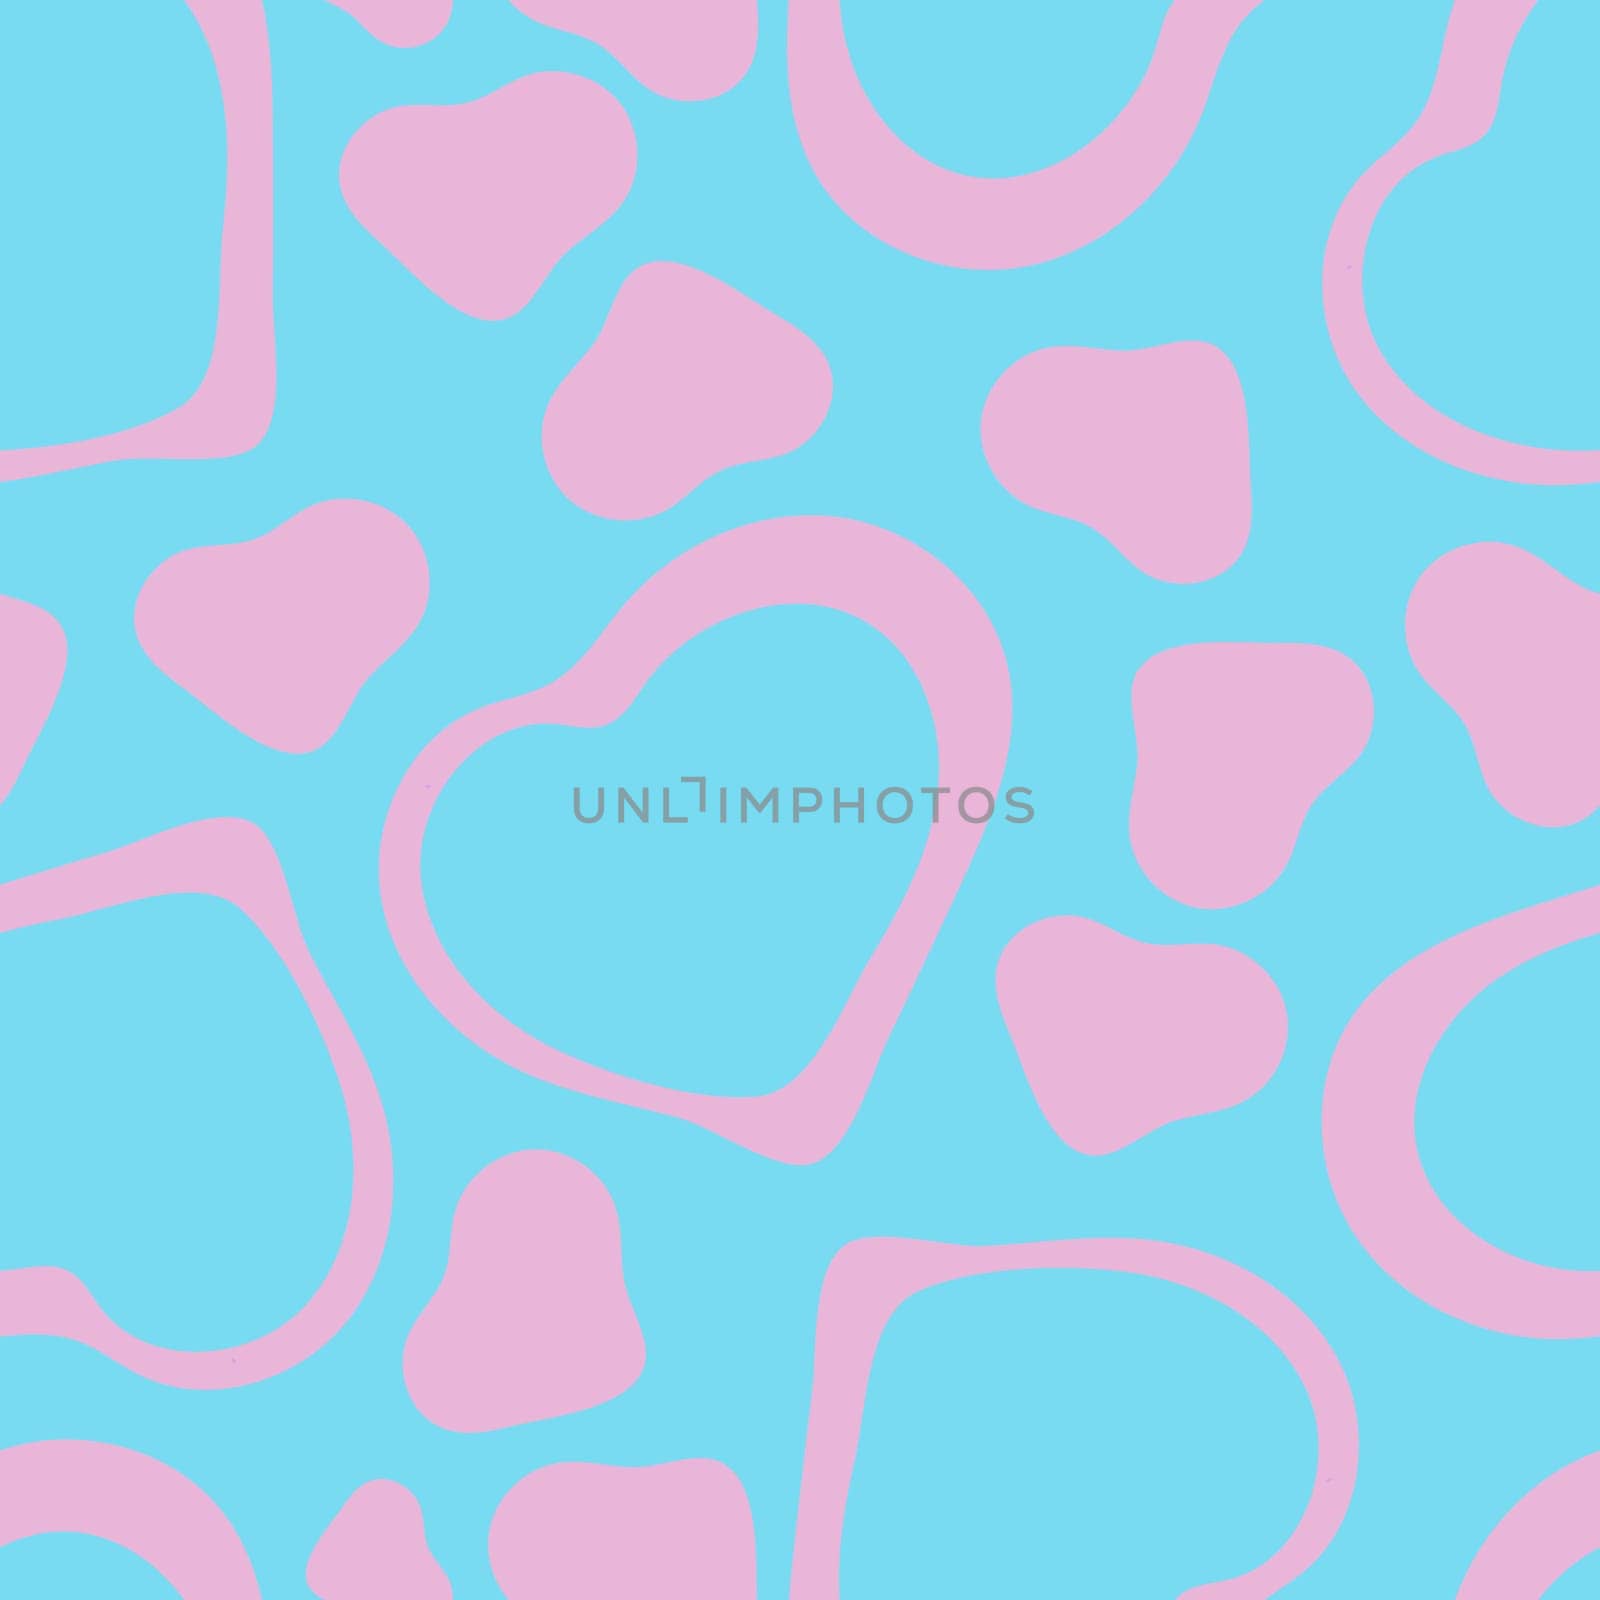 Hand Drawn Seamless Patterns with Hearts in Doodle Style. Romantic Love Digital Paper for Valentines Day. Colorful Hearts on Blue Background.